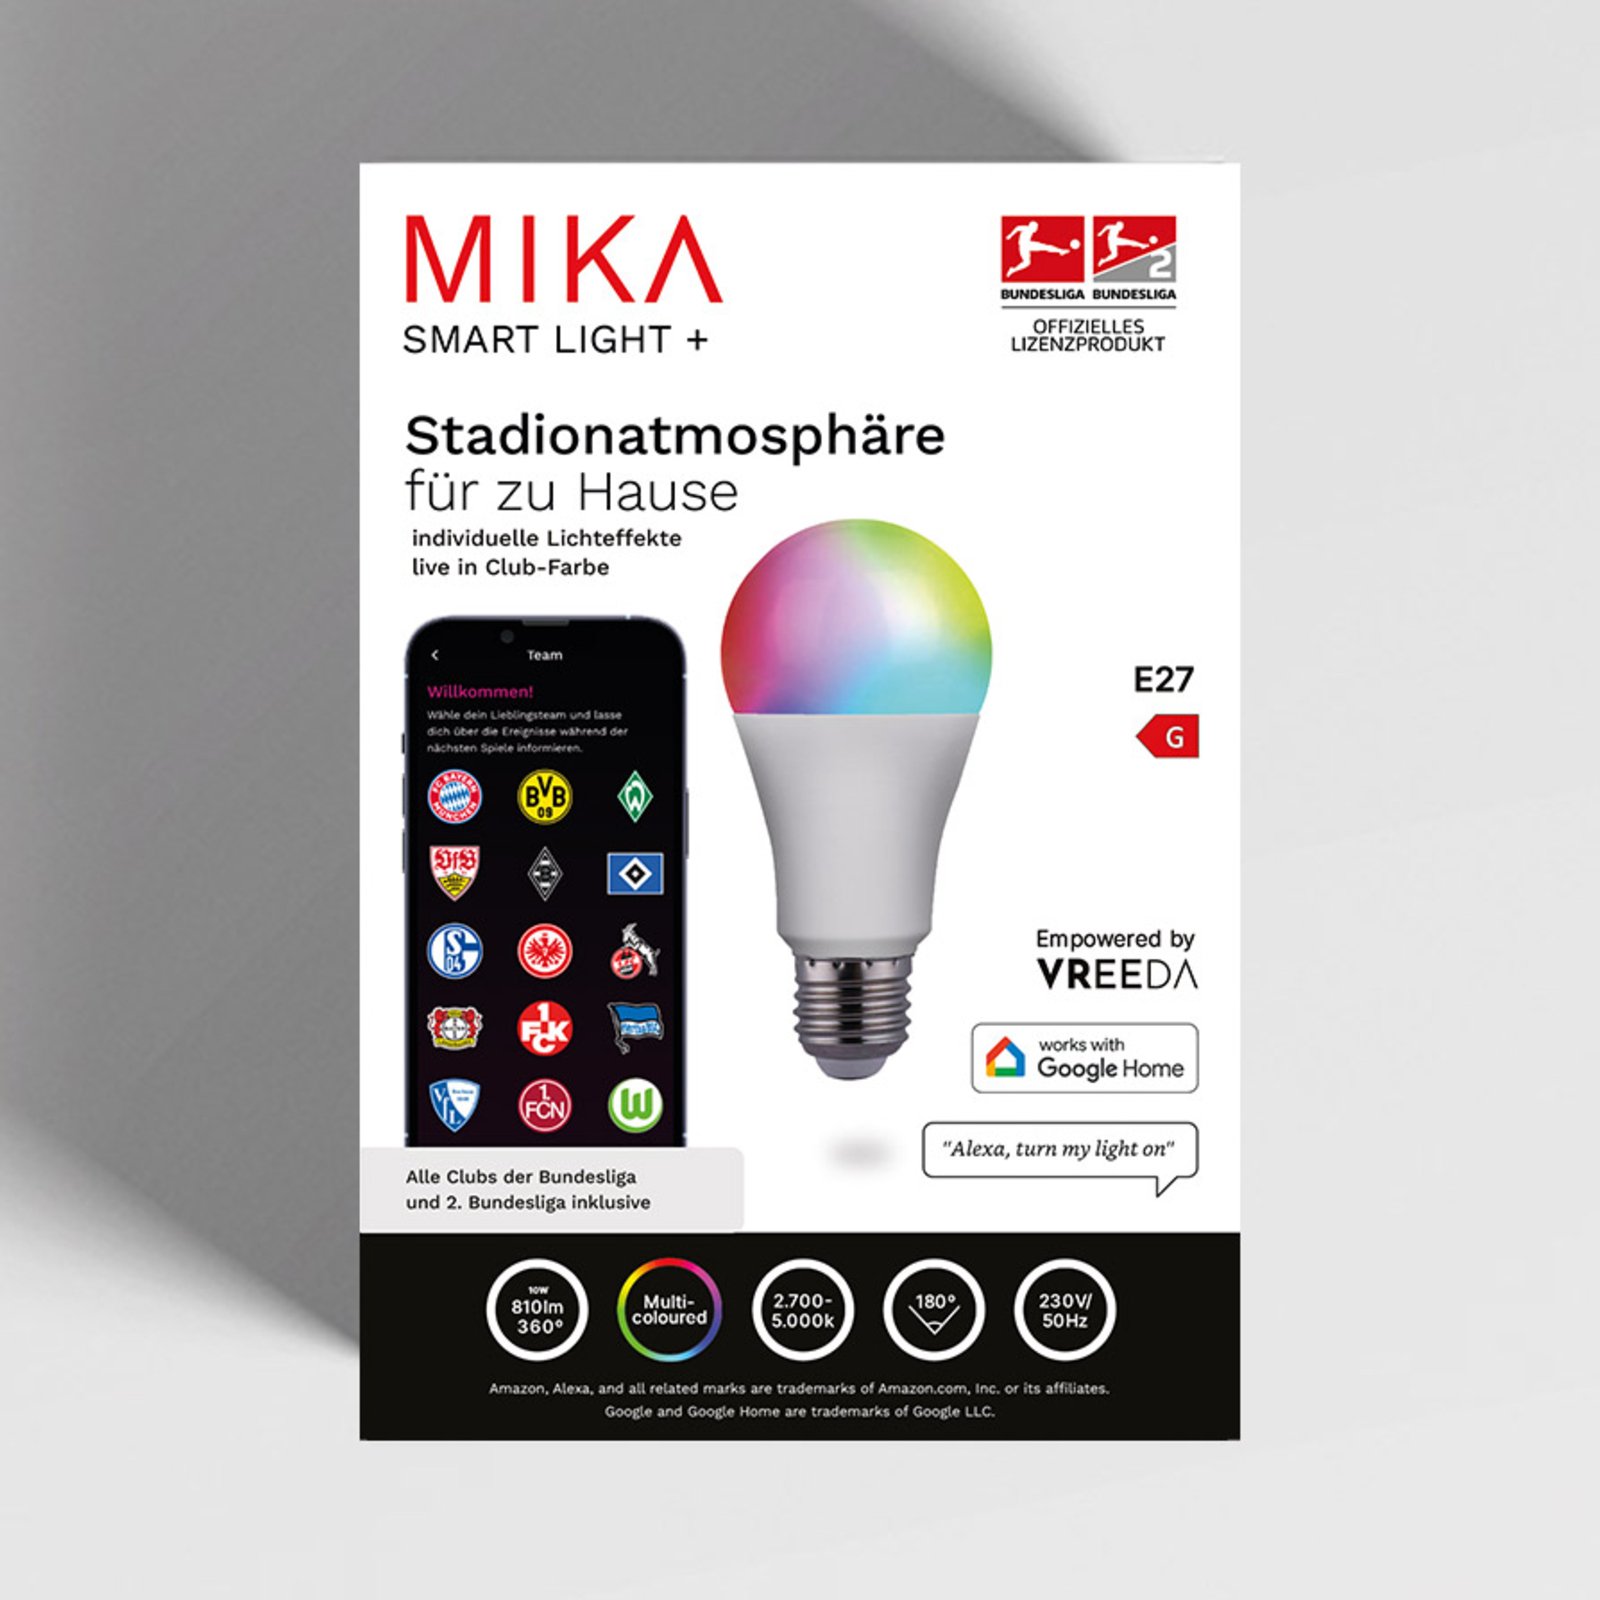 LED lamp Mika voor stadionsfeer, E27 10W RGBW